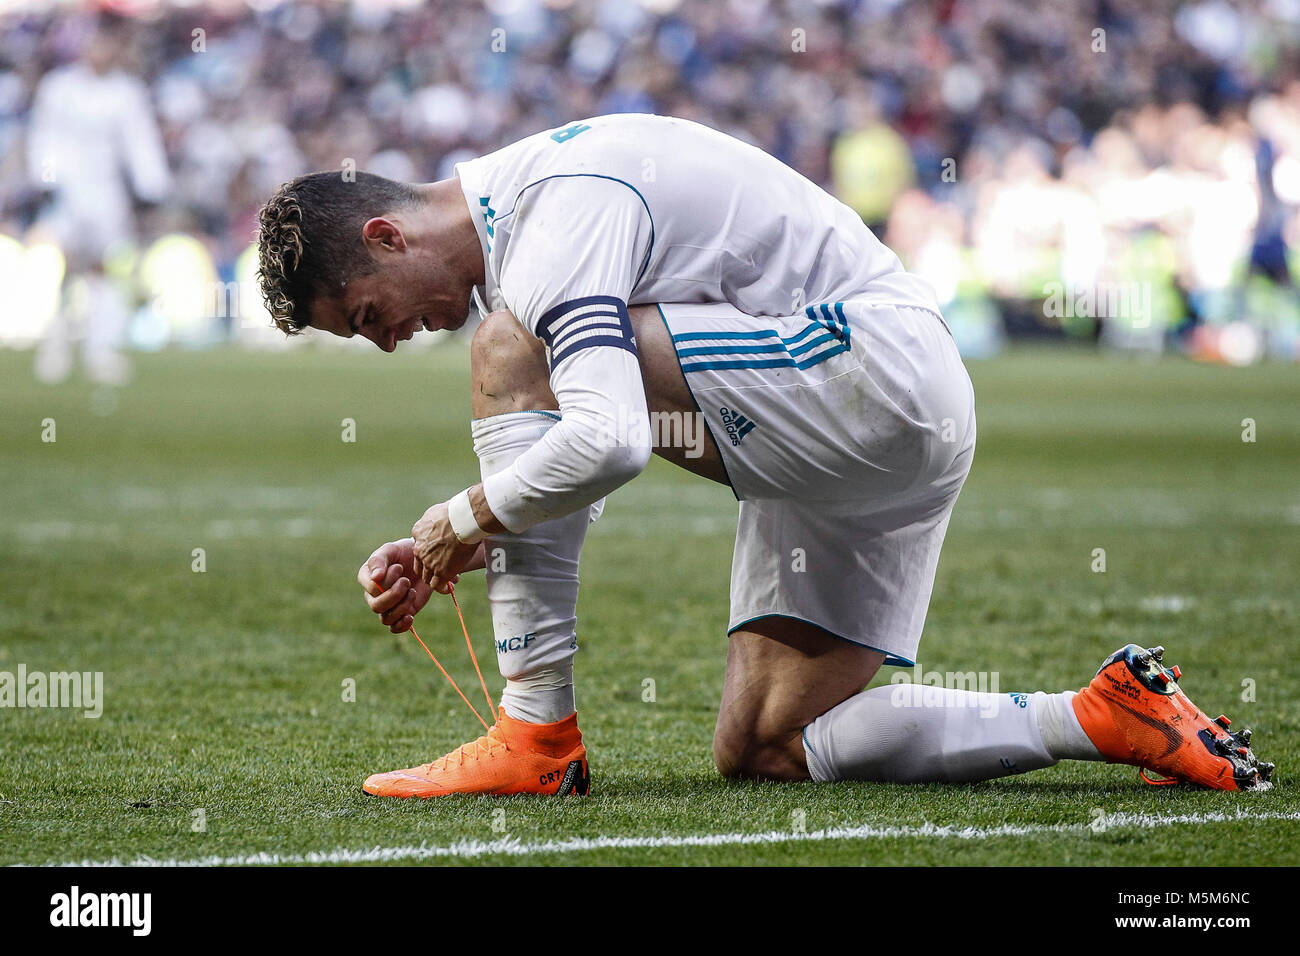 Cristiano Ronaldo (Real Madrid) tying his boots during the match La Liga  match between Real Madrid vs Deportivo Alaves at the Santiago Bernabeu  stadium in Madrid, Spain, February 24, 2018. Credit: Gtres